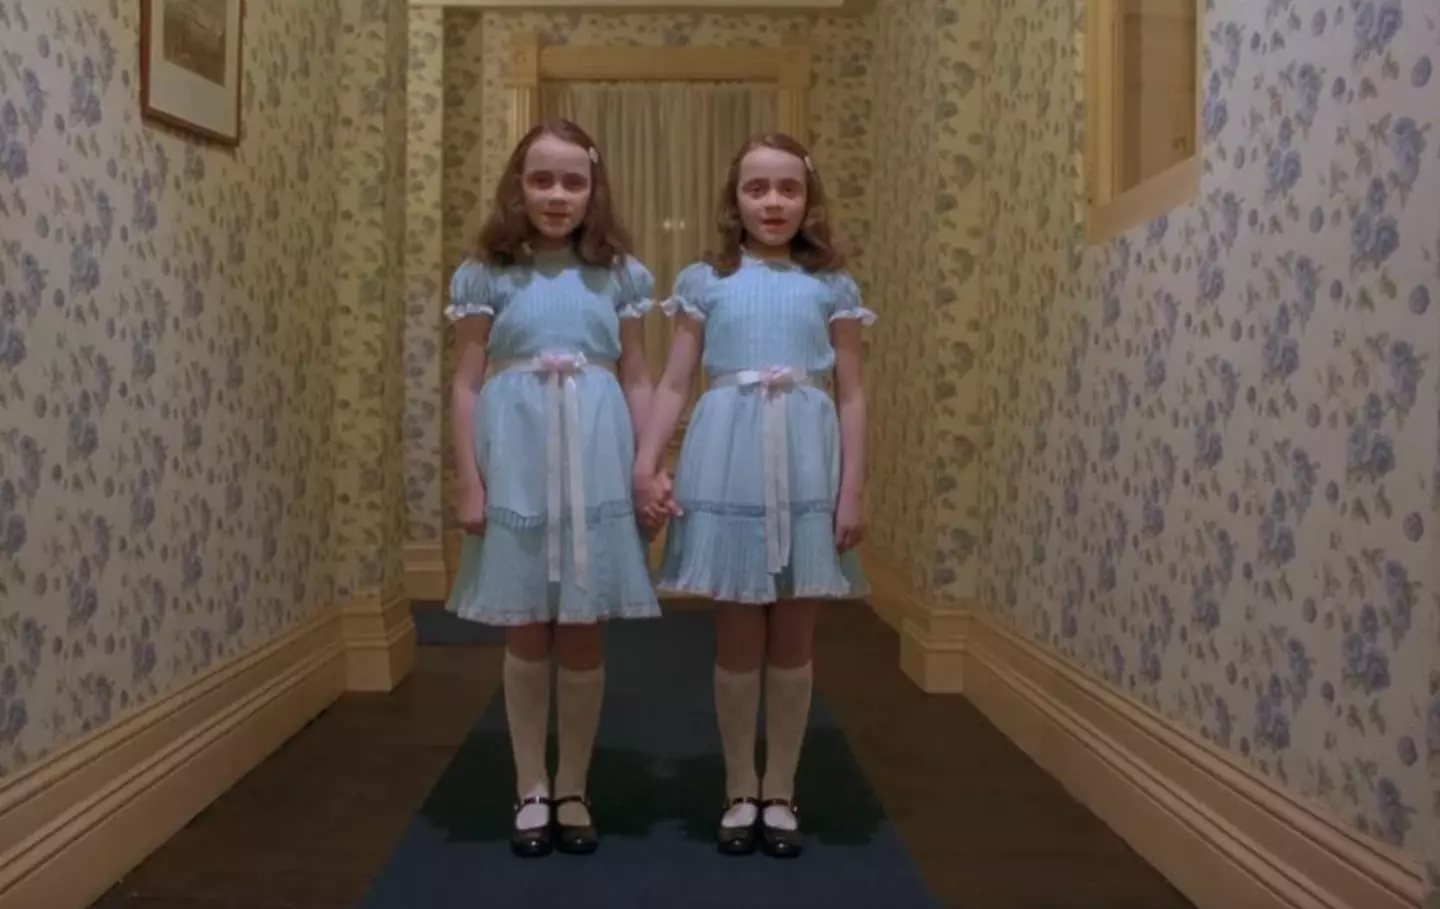 The Grady twins have become horror icons in their own right.